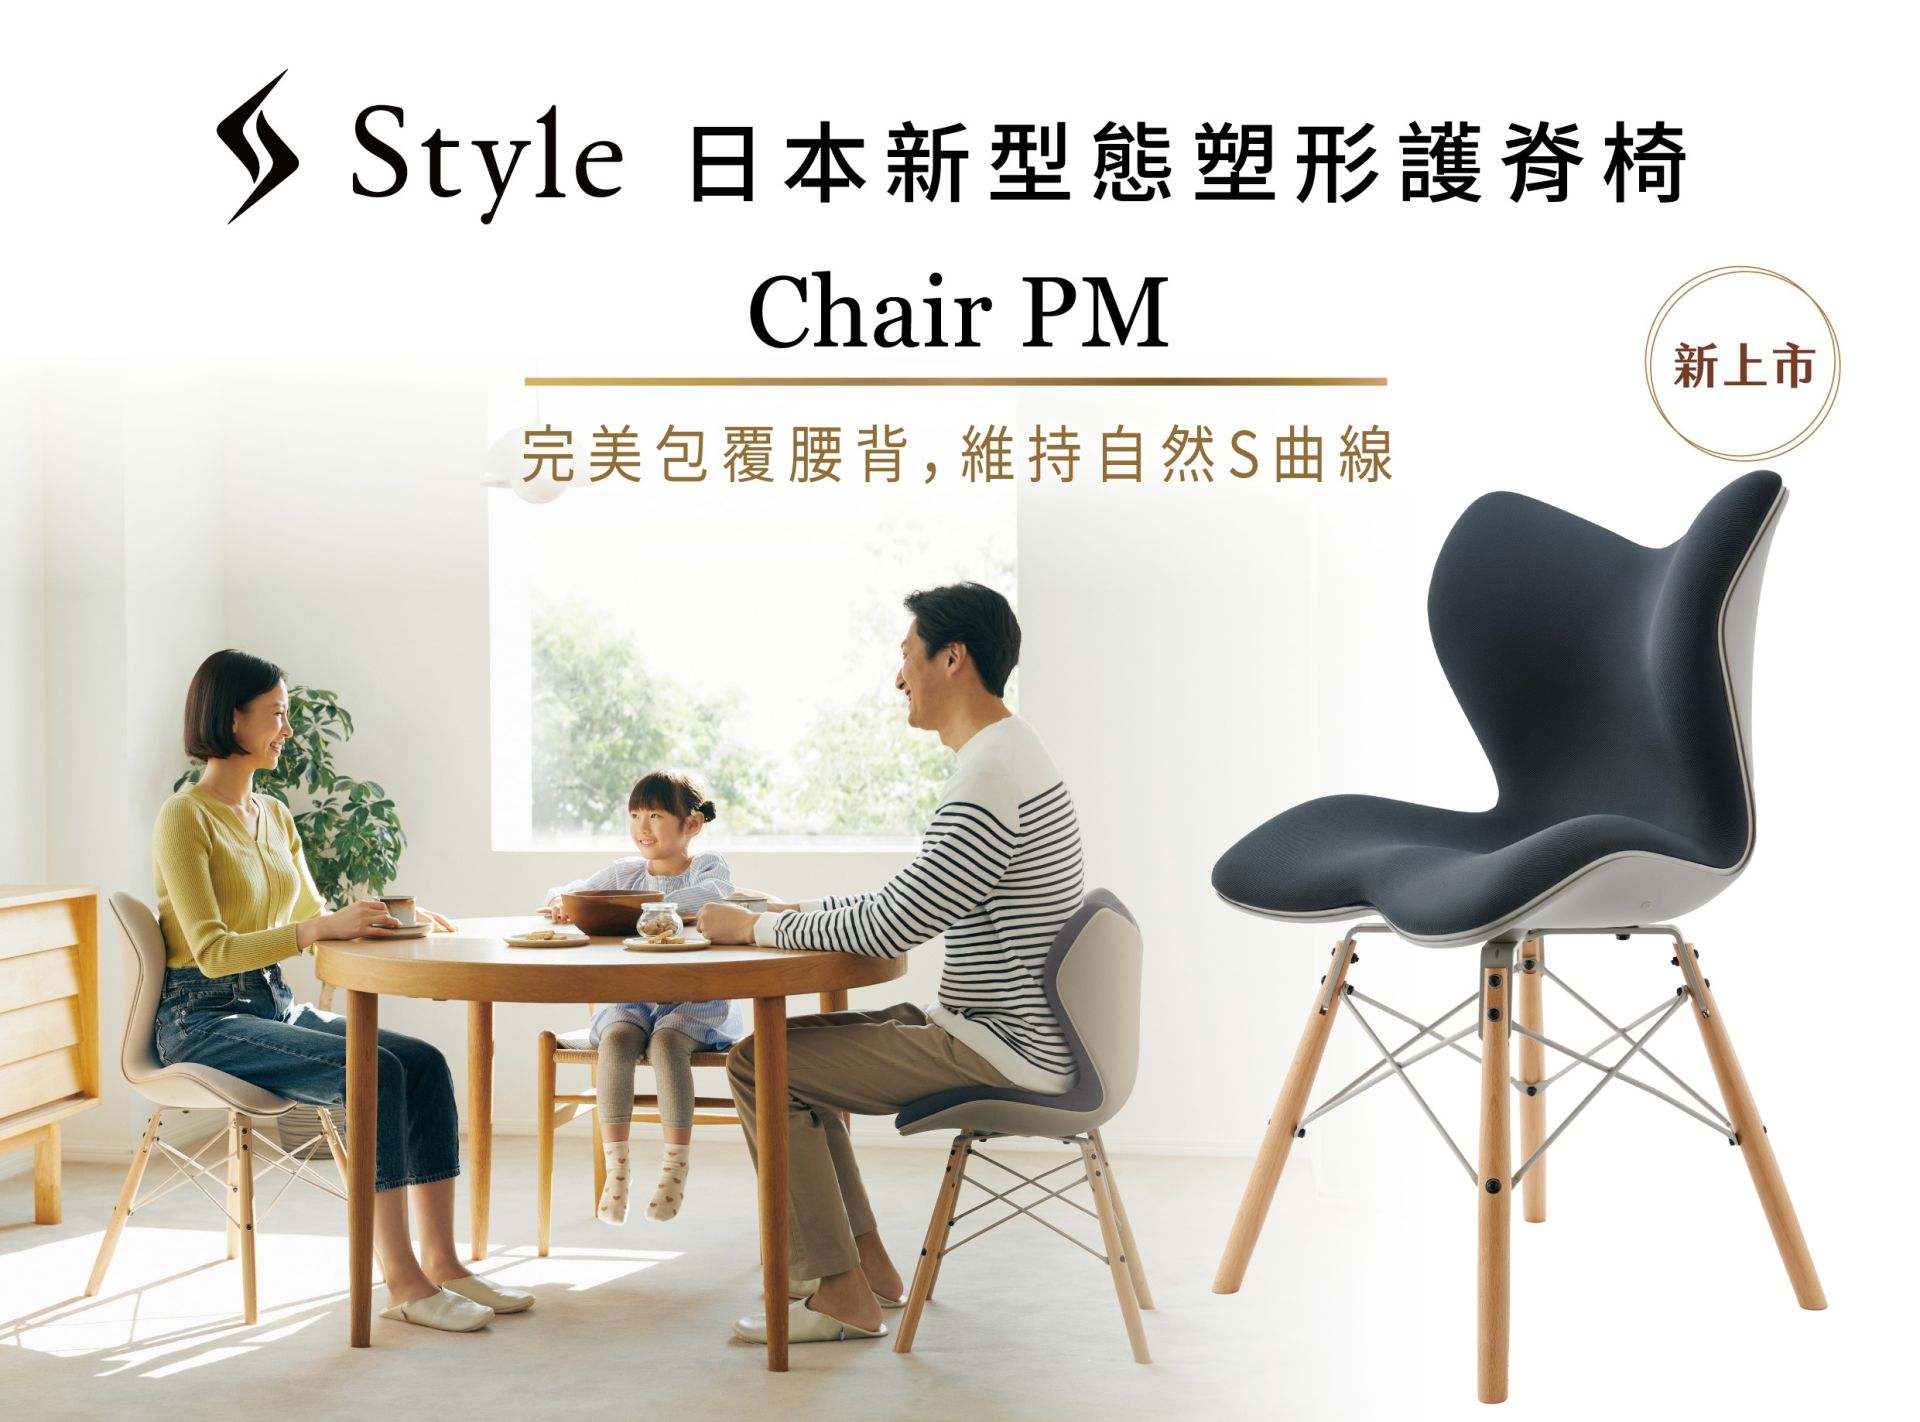 Style_ChairPM_01